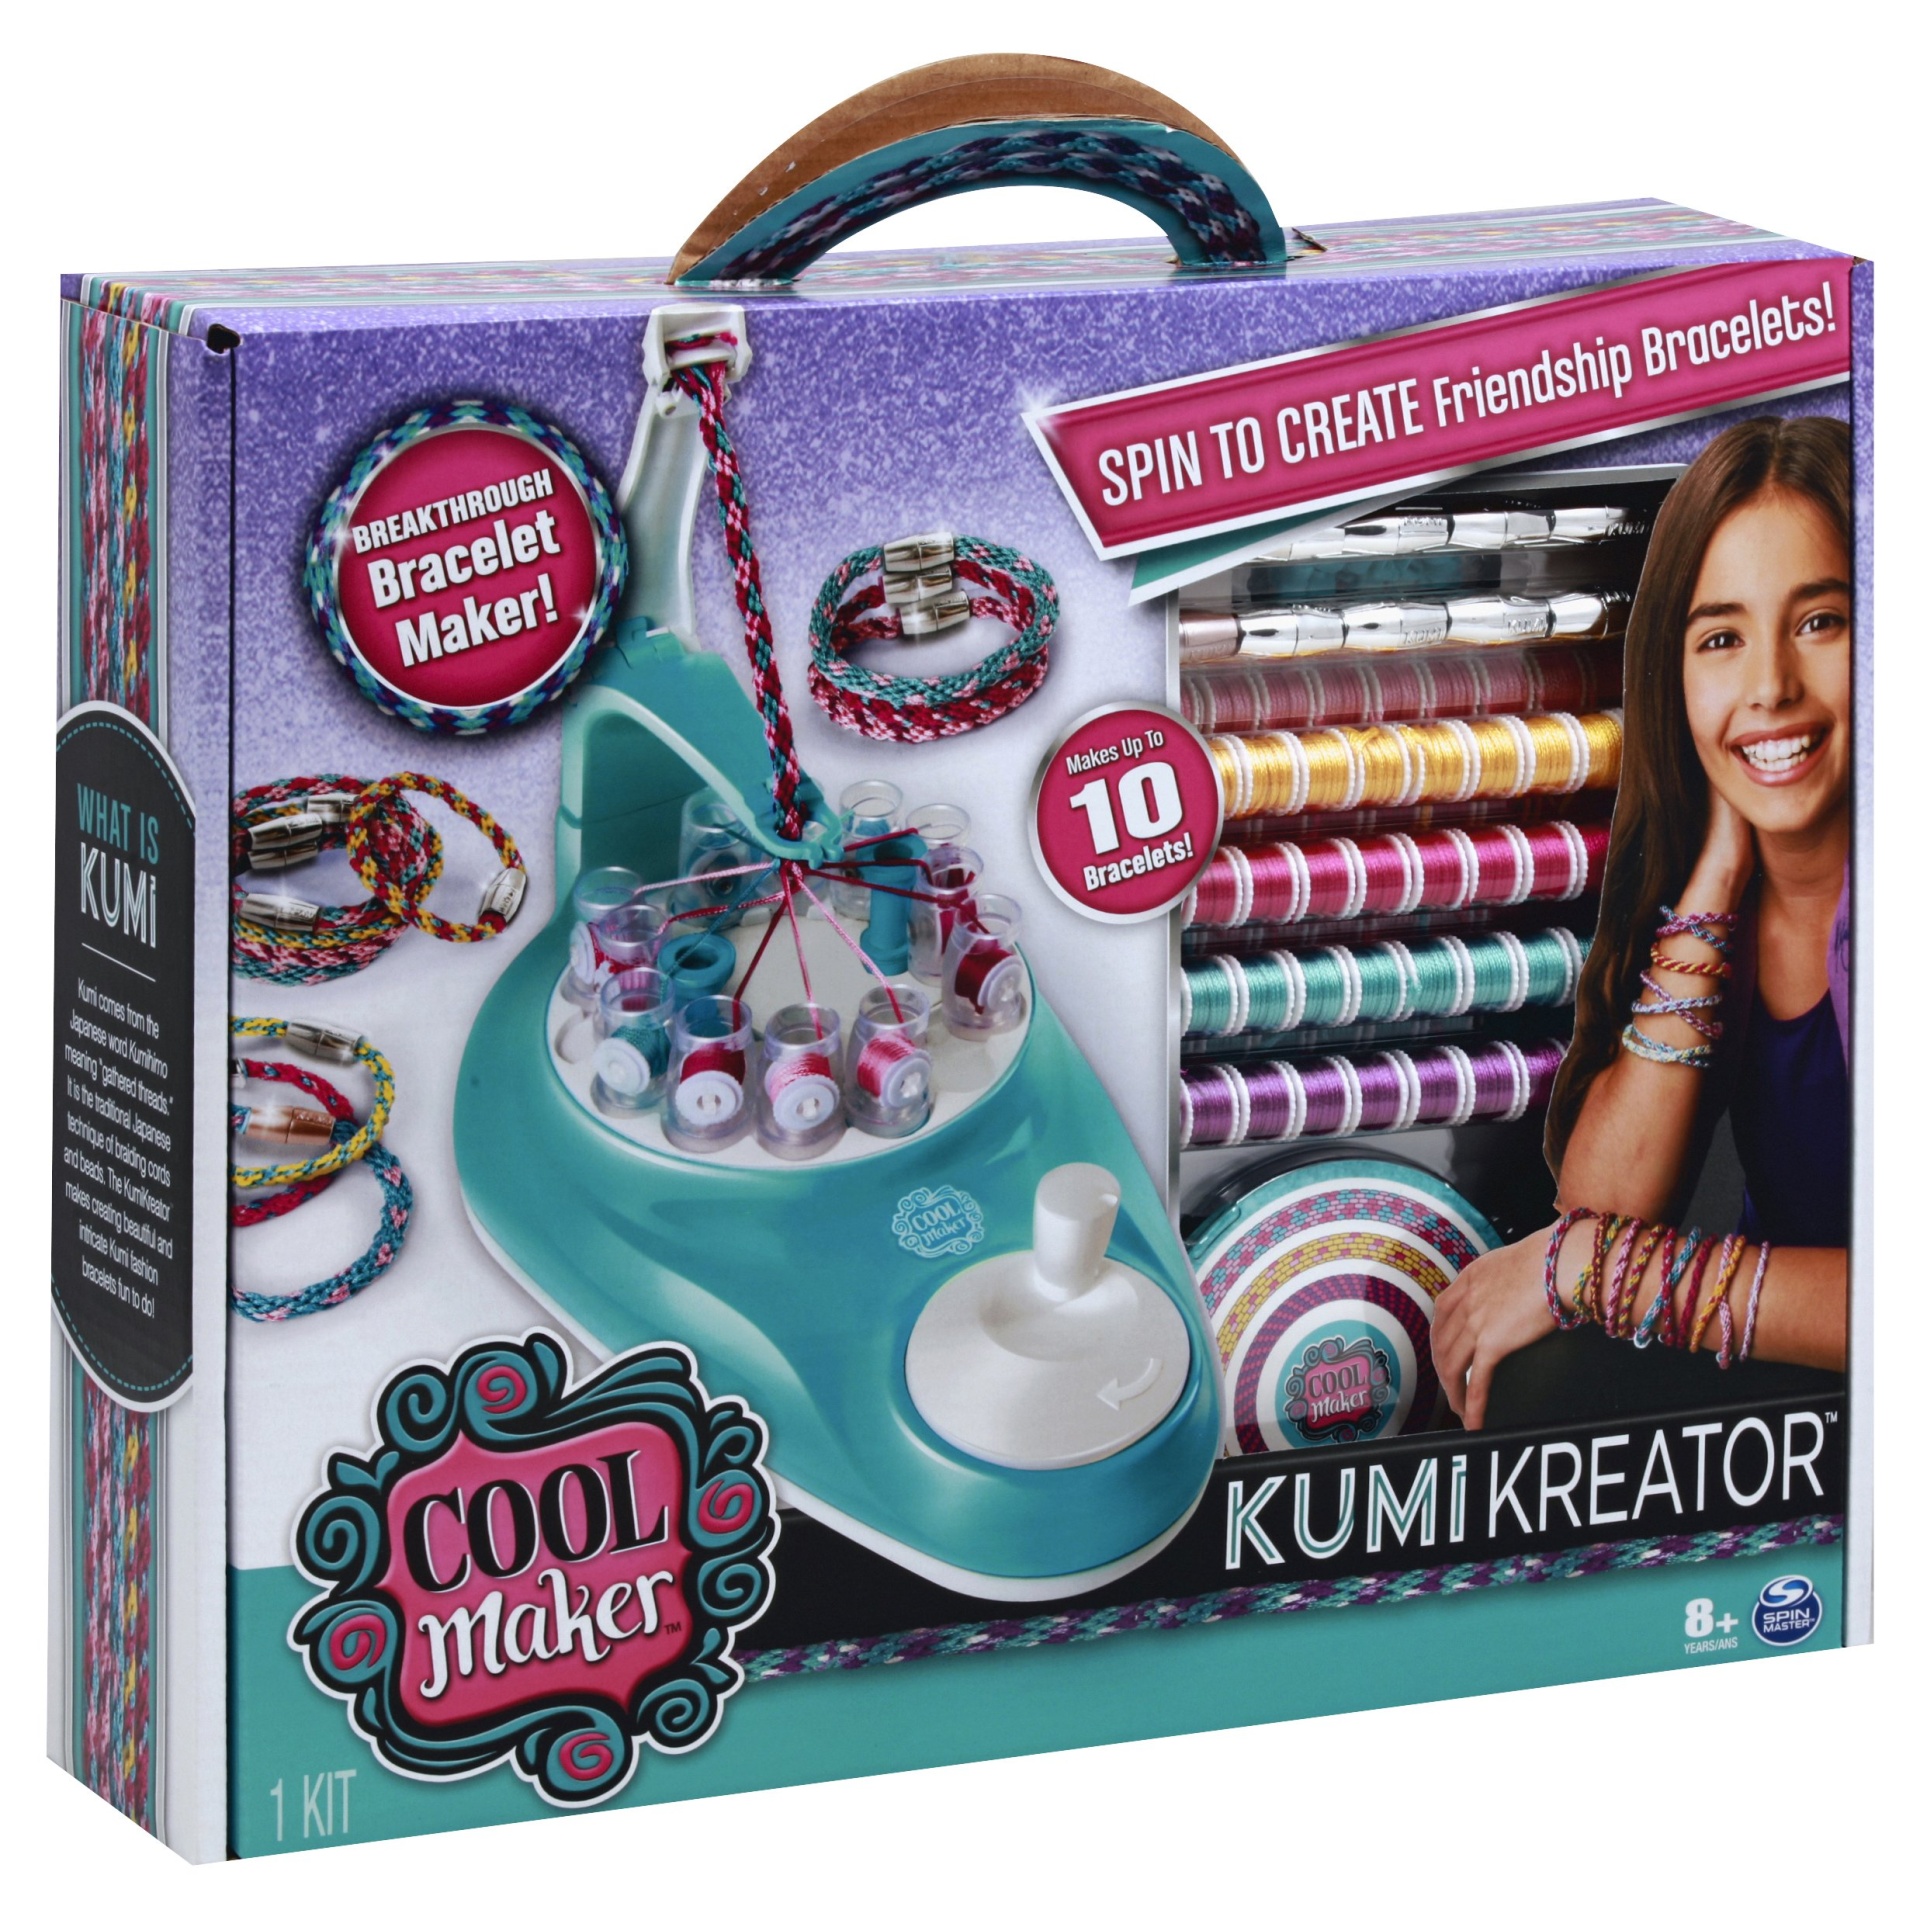 Cool Maker KumiKreator Friendship Bracelet Maker Review and Giveaway   Penny Plays